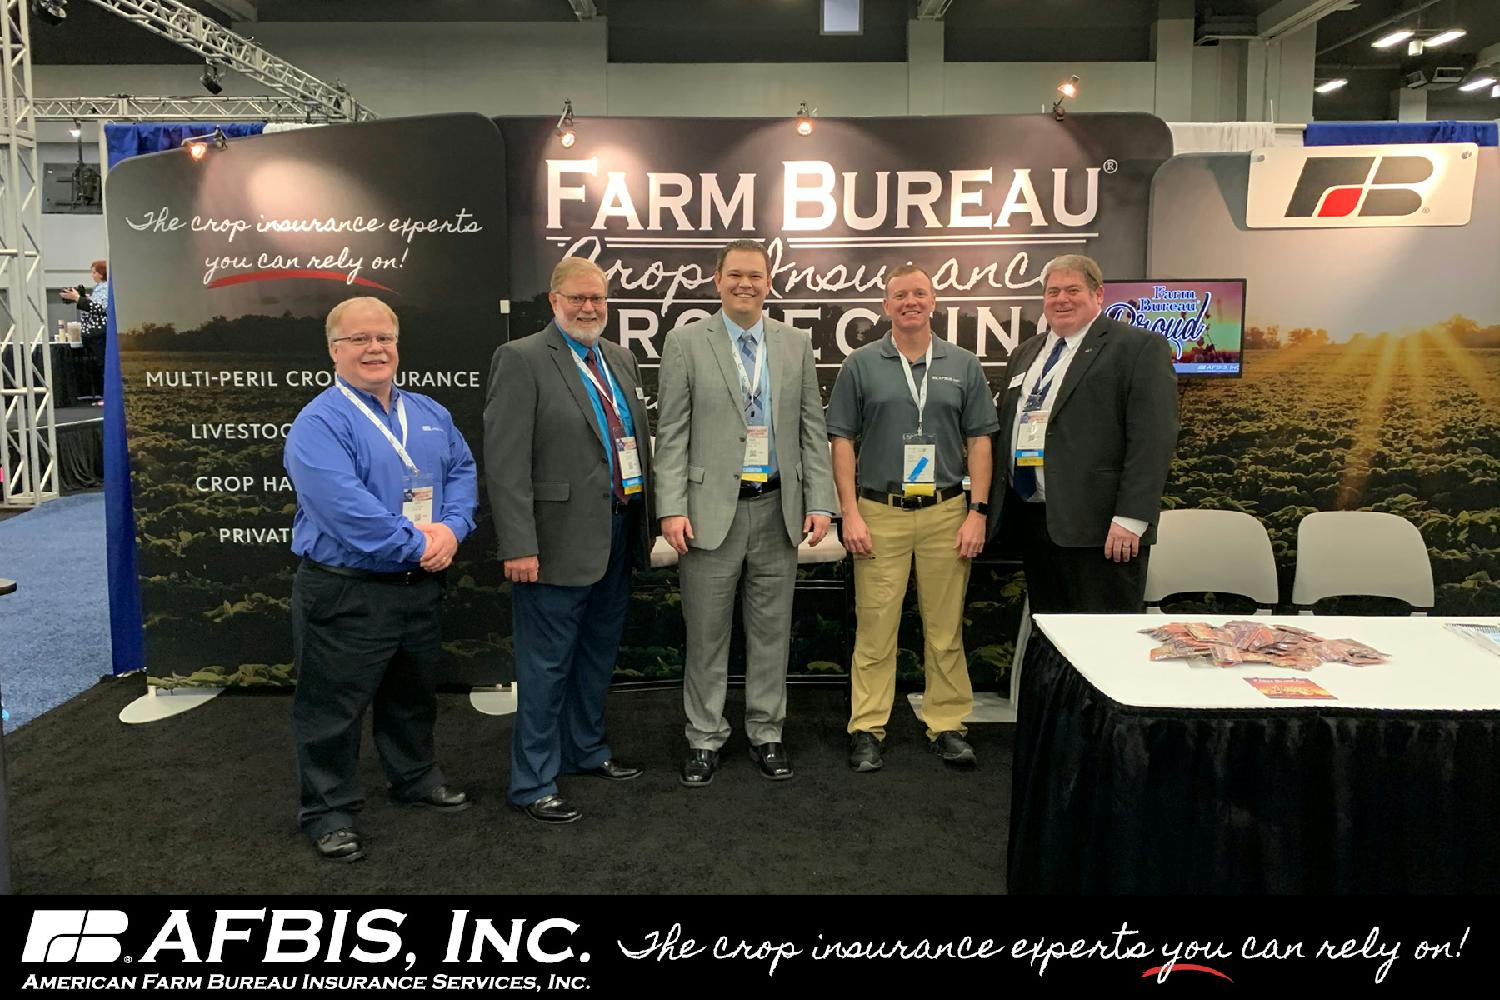 Trade Show Booth at the Farm Bureau Annual Meeting and Convention